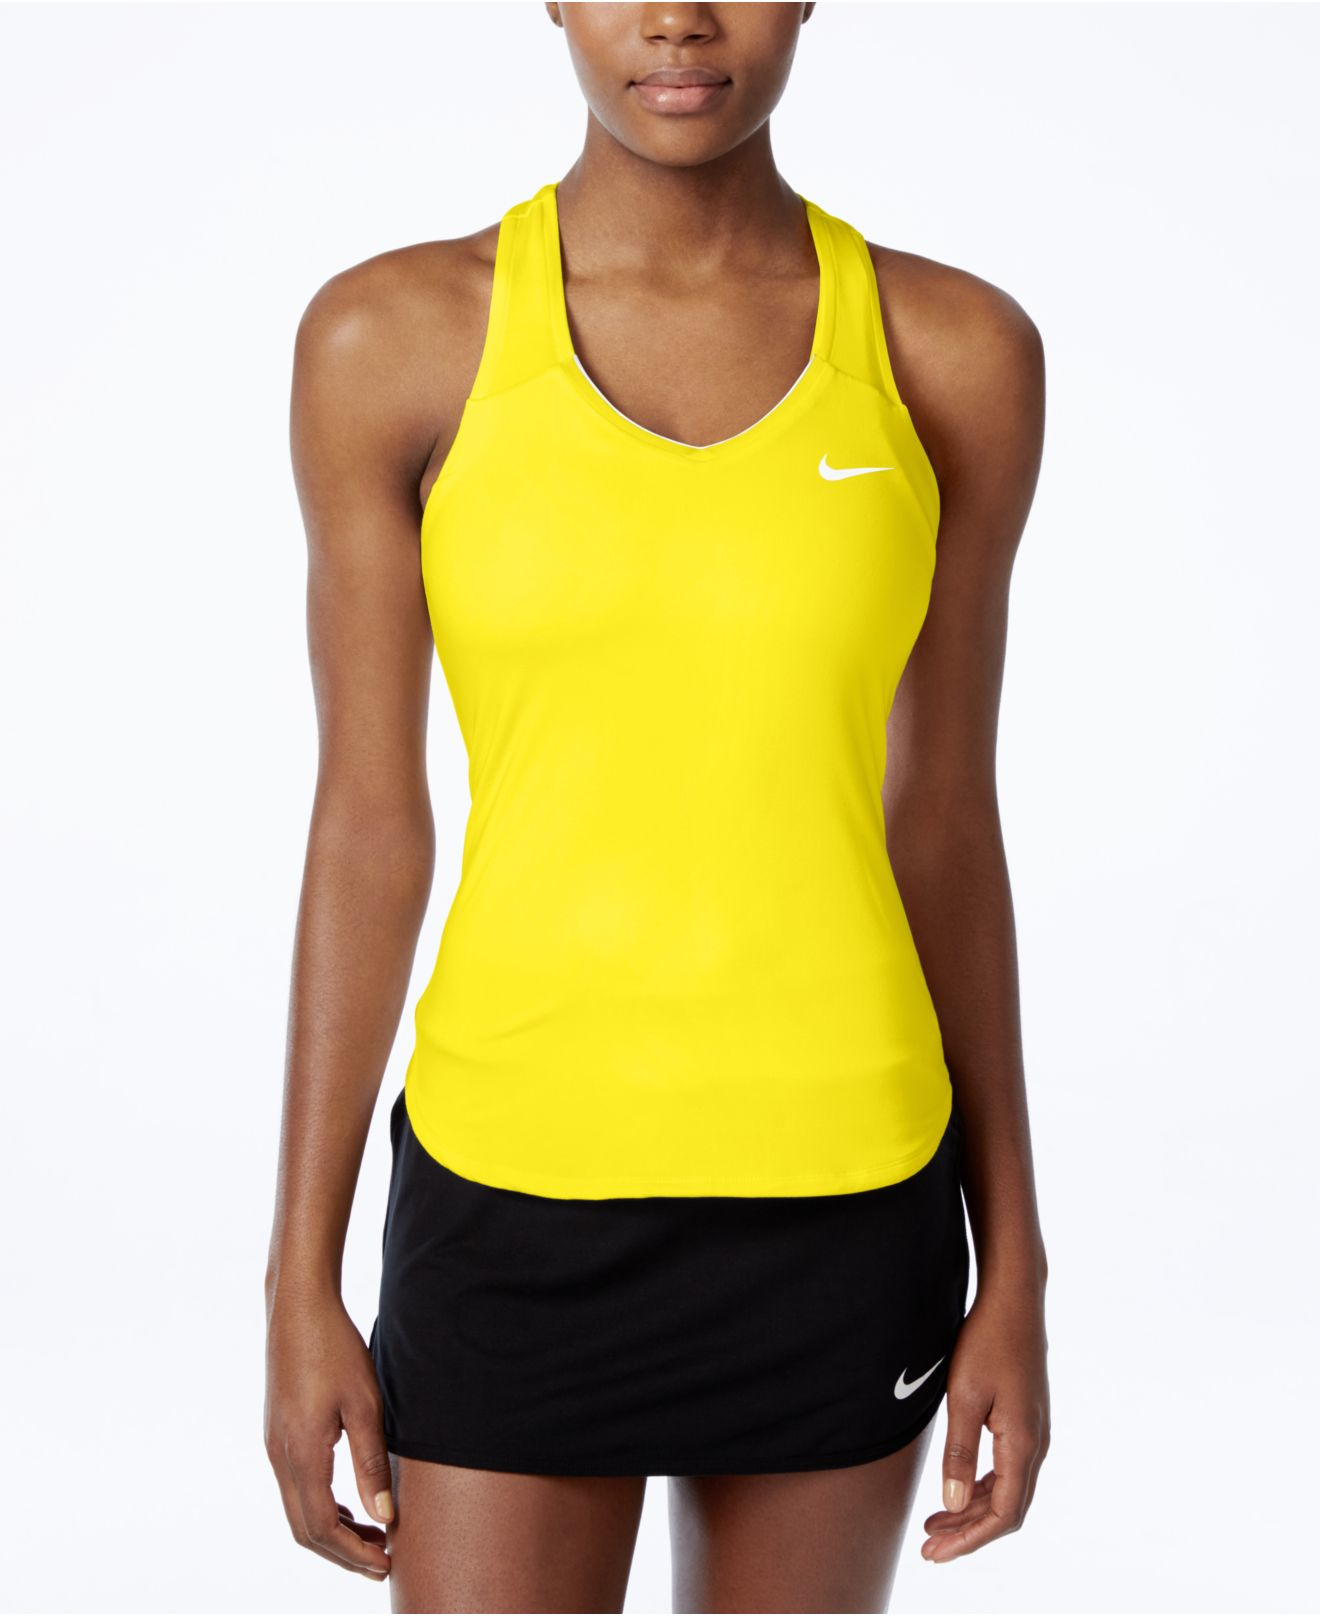 Nike Synthetic Court Racerback Dri-fit Tennis Tank Top in Yellow | Lyst